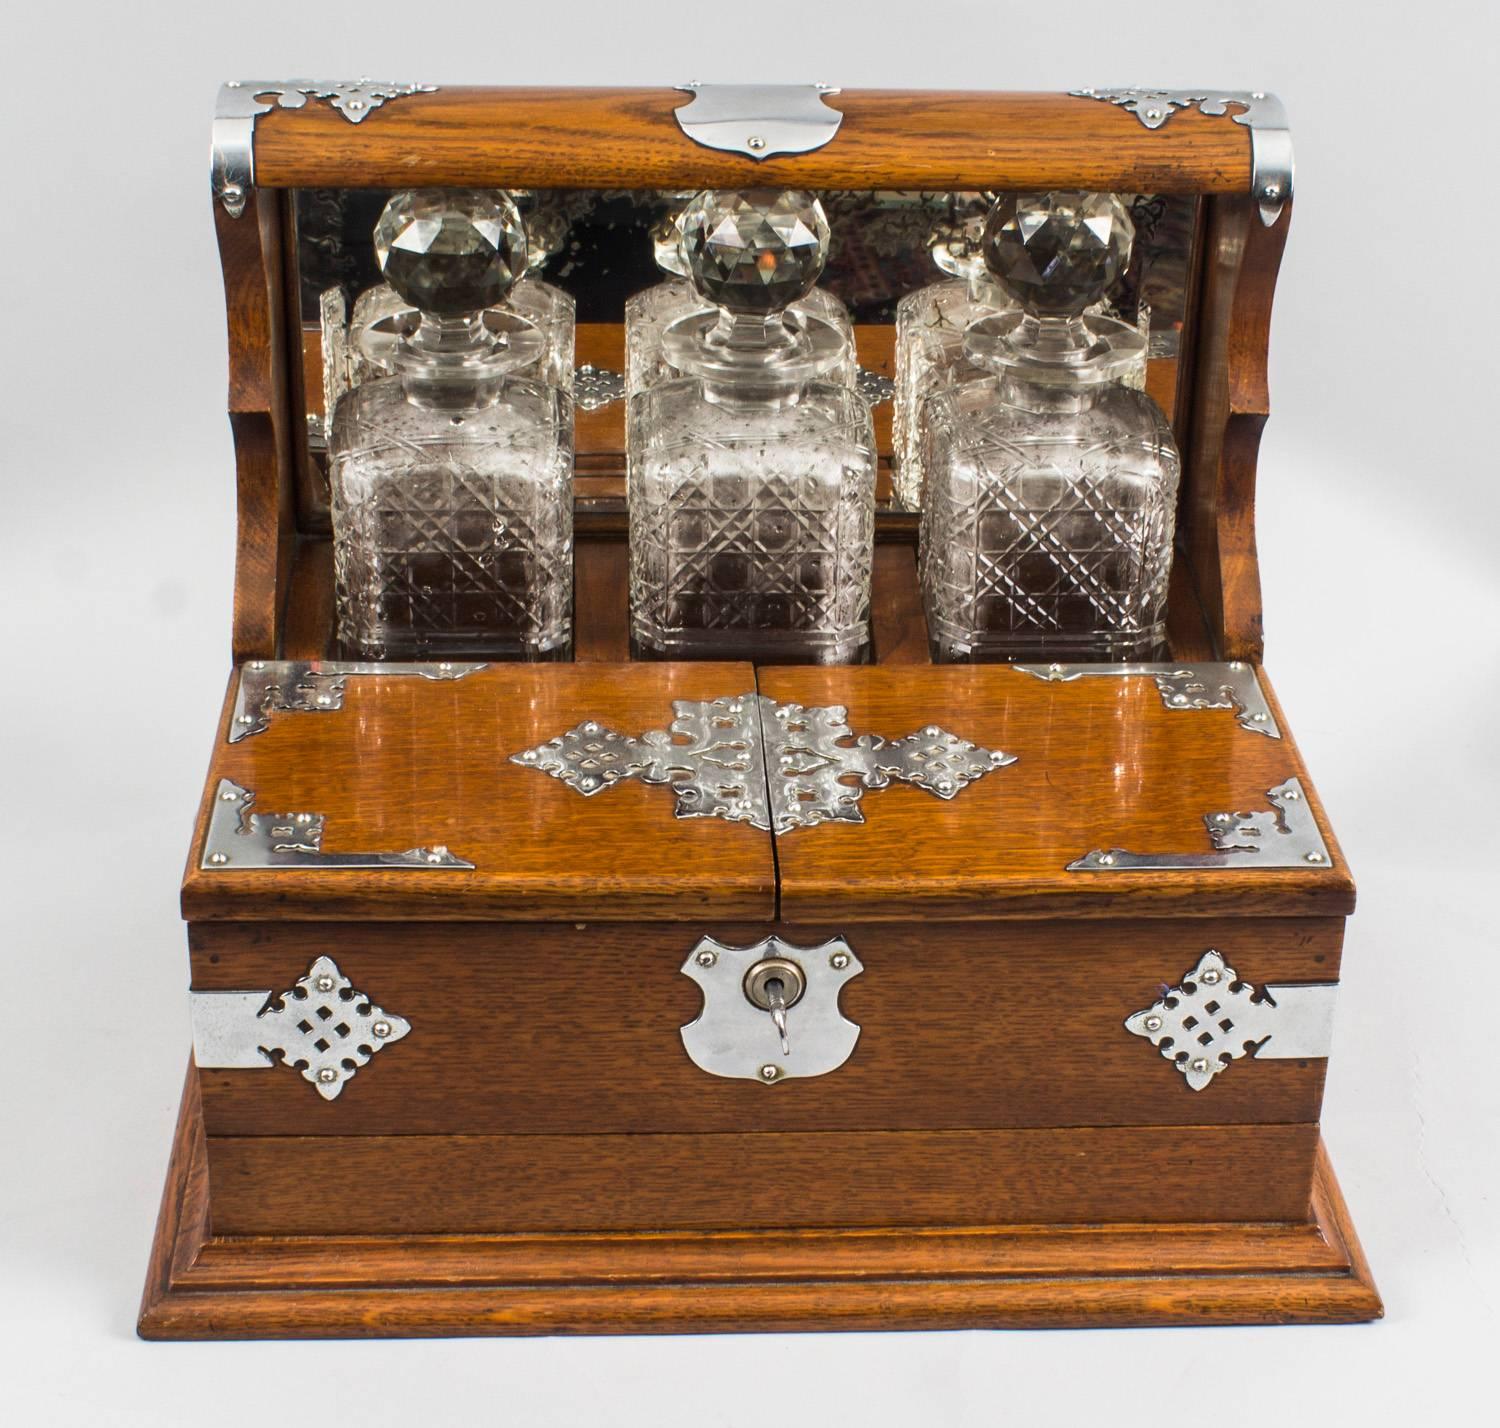 This is a superb antique Victorian oak cased three decanter tantalus with decorative cut brass silver plated mounts, circa 1870 in date.

It was skillfully crafted in tiger oak with beautiful silver plated mounts and stylish handles. There are